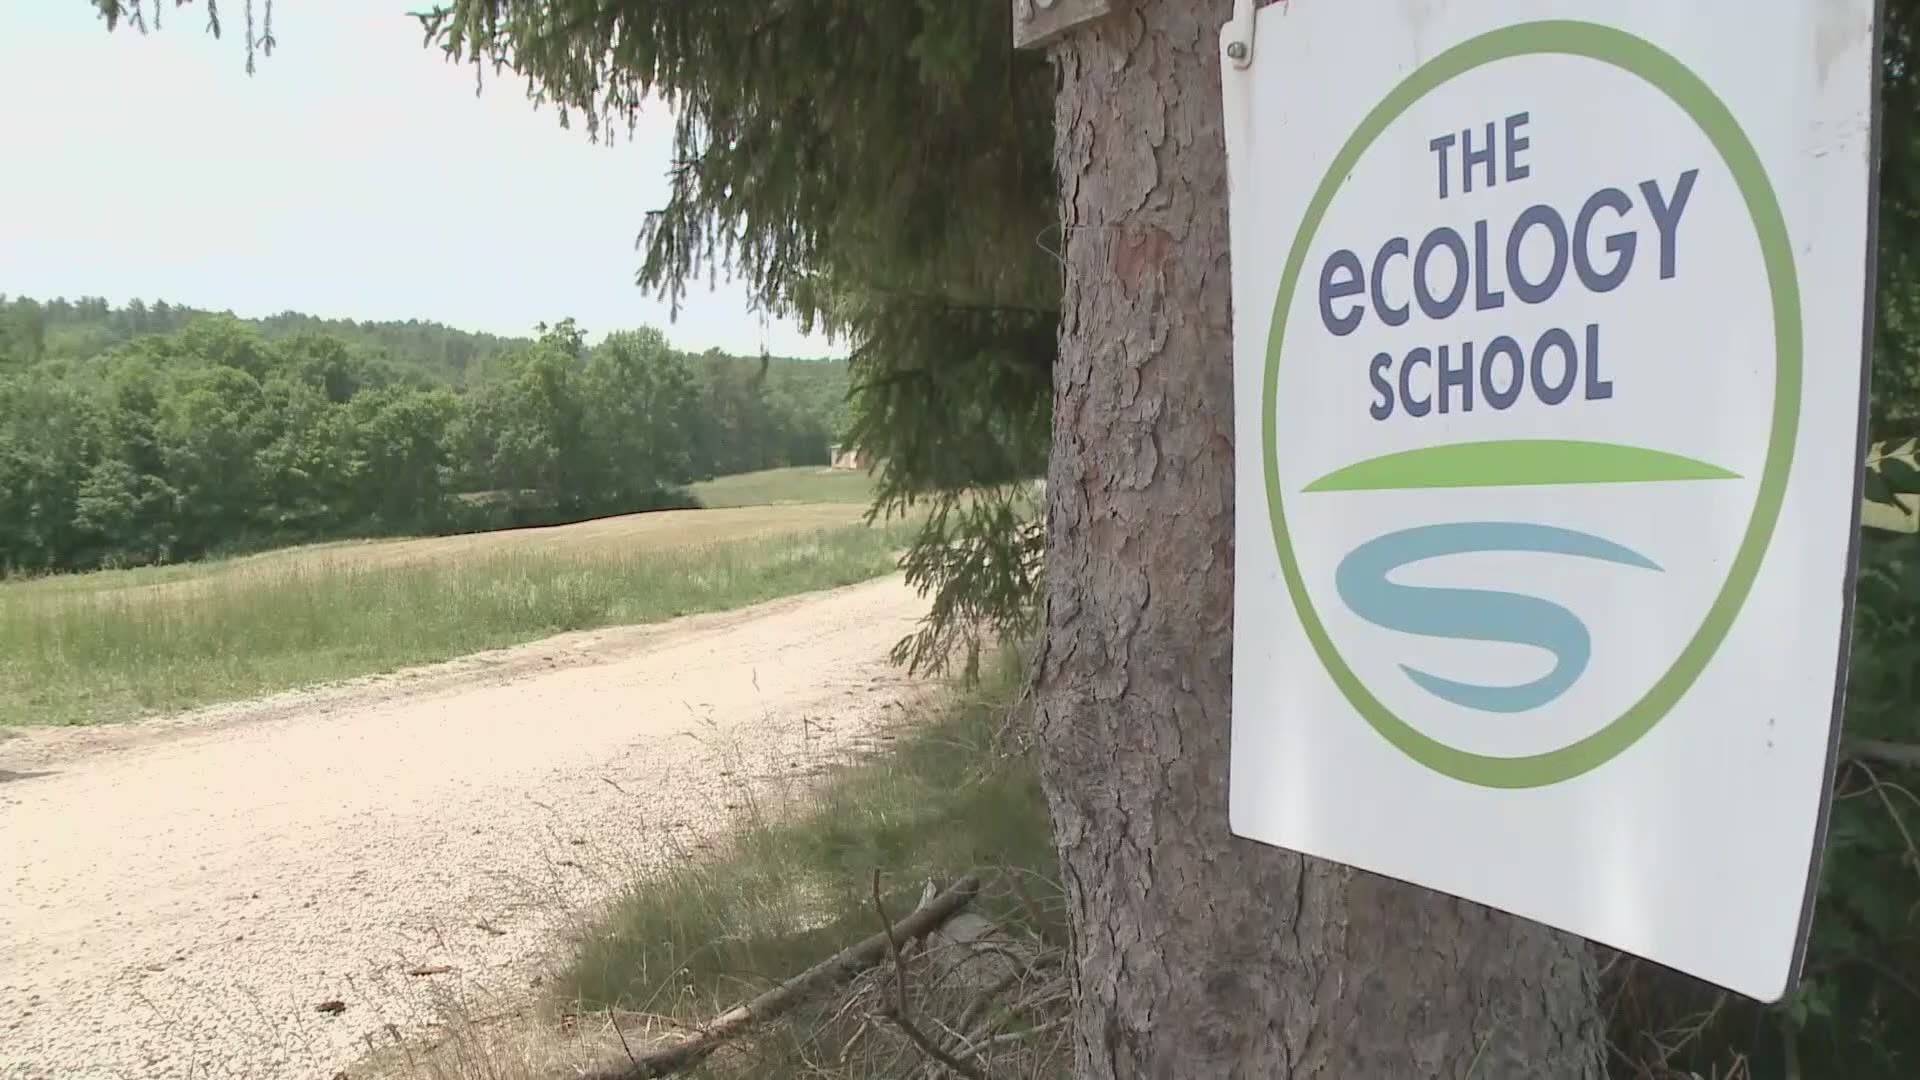 The Ecology School of Maine is the largest school of its kind here in New England and it's breaking ground virtually through a new online portal.